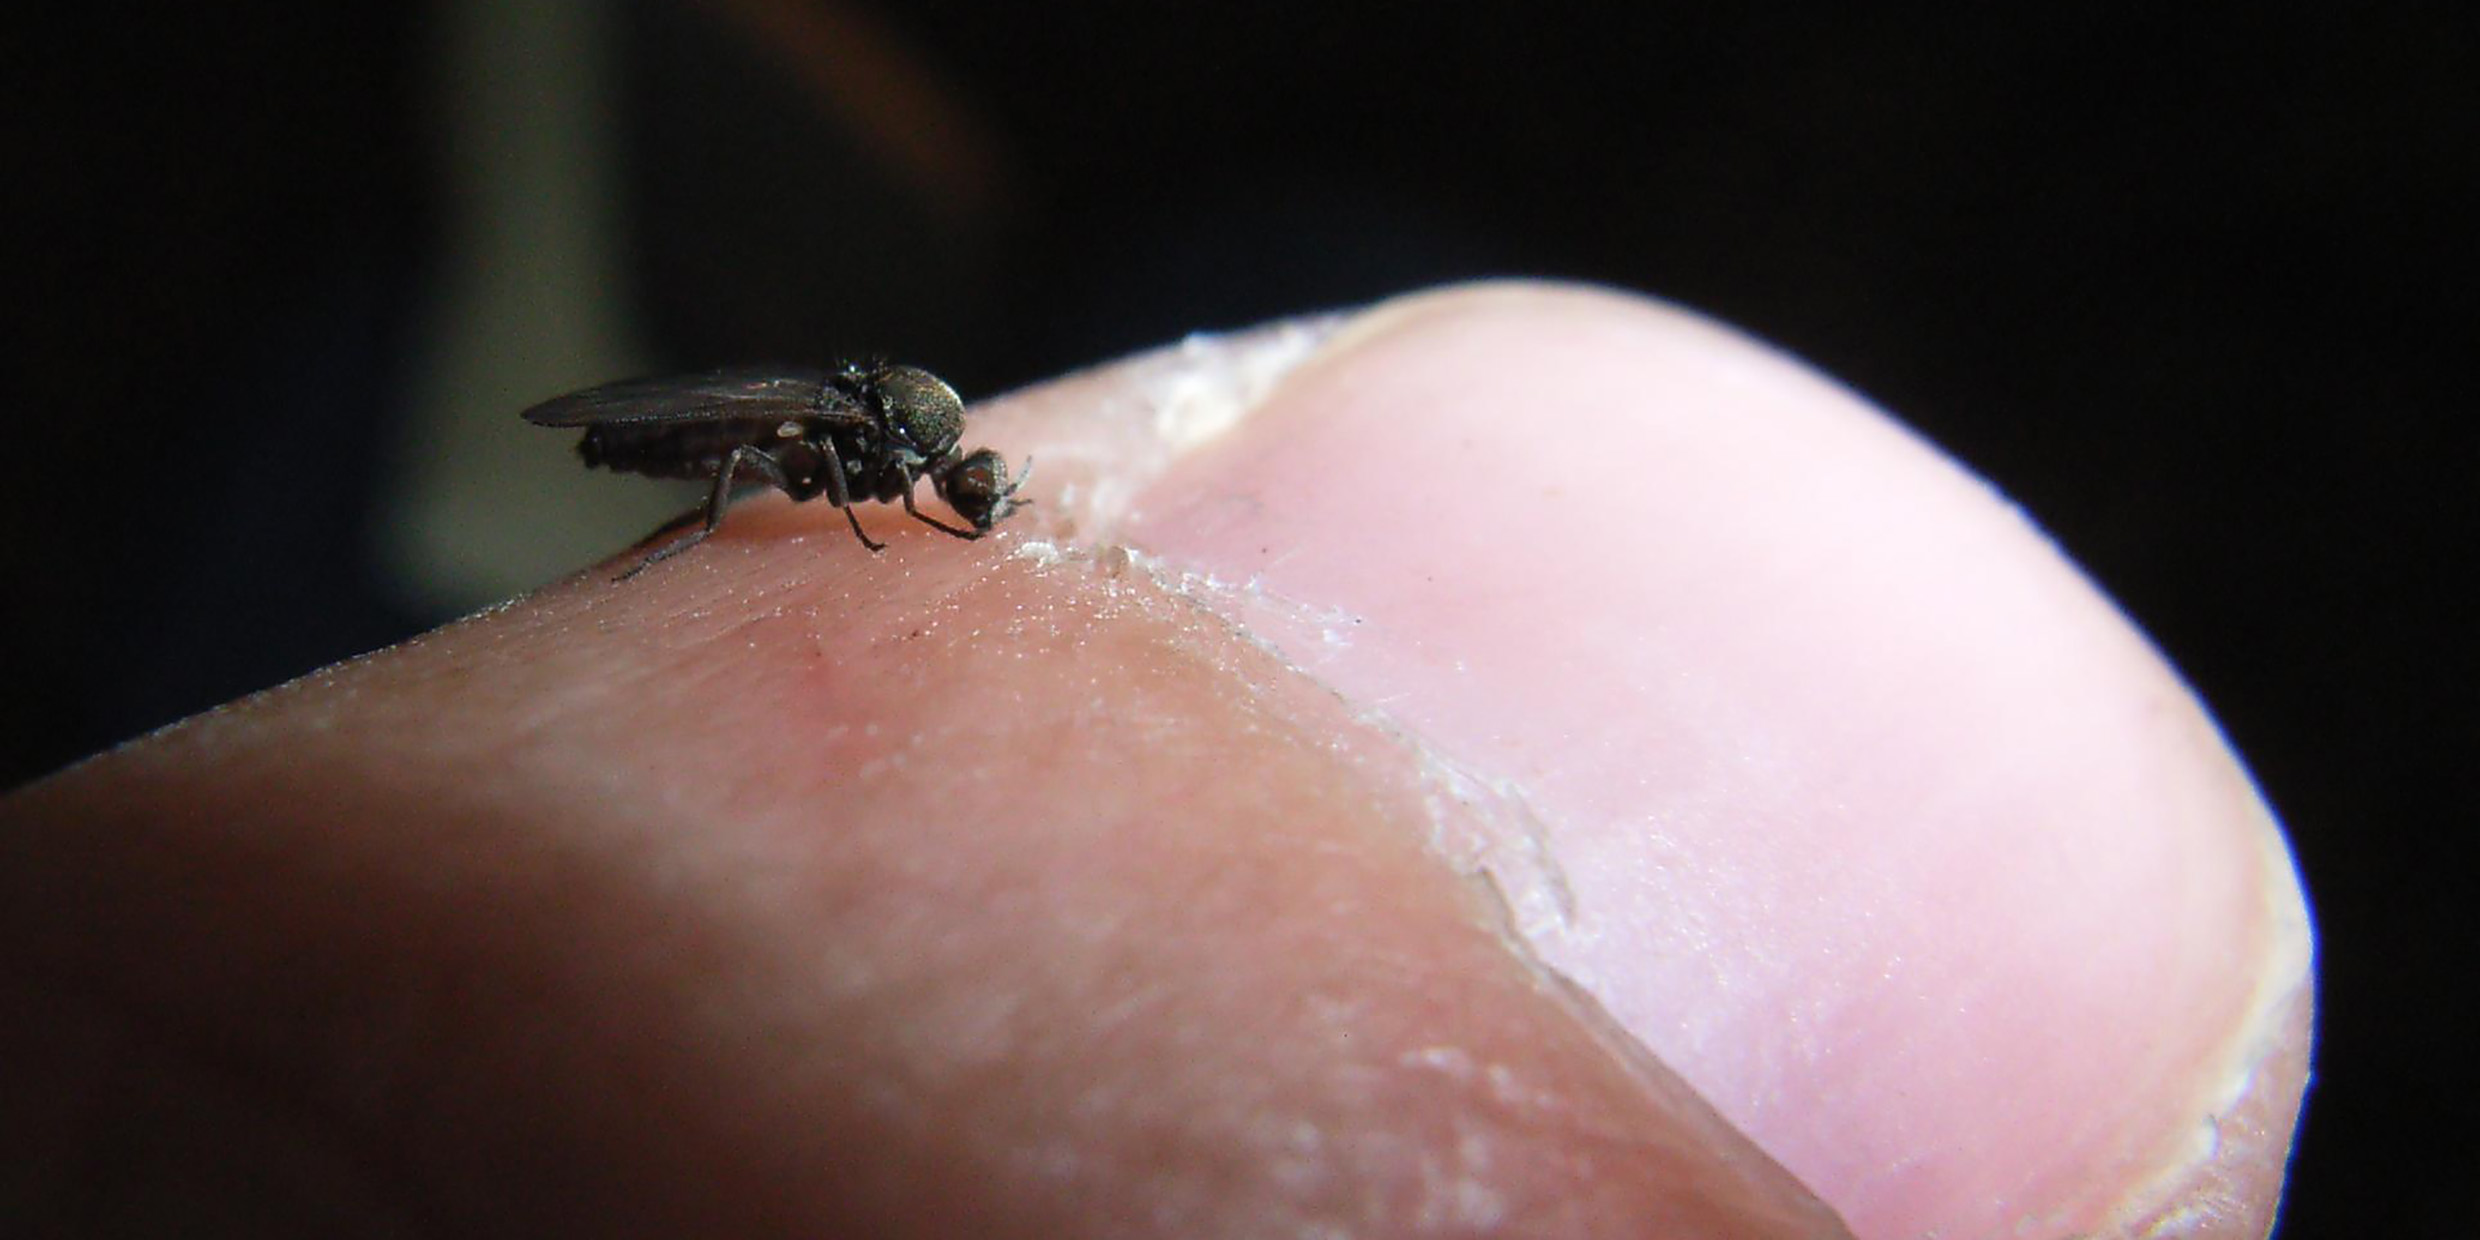 Image of a tiny insect biting a human thumb